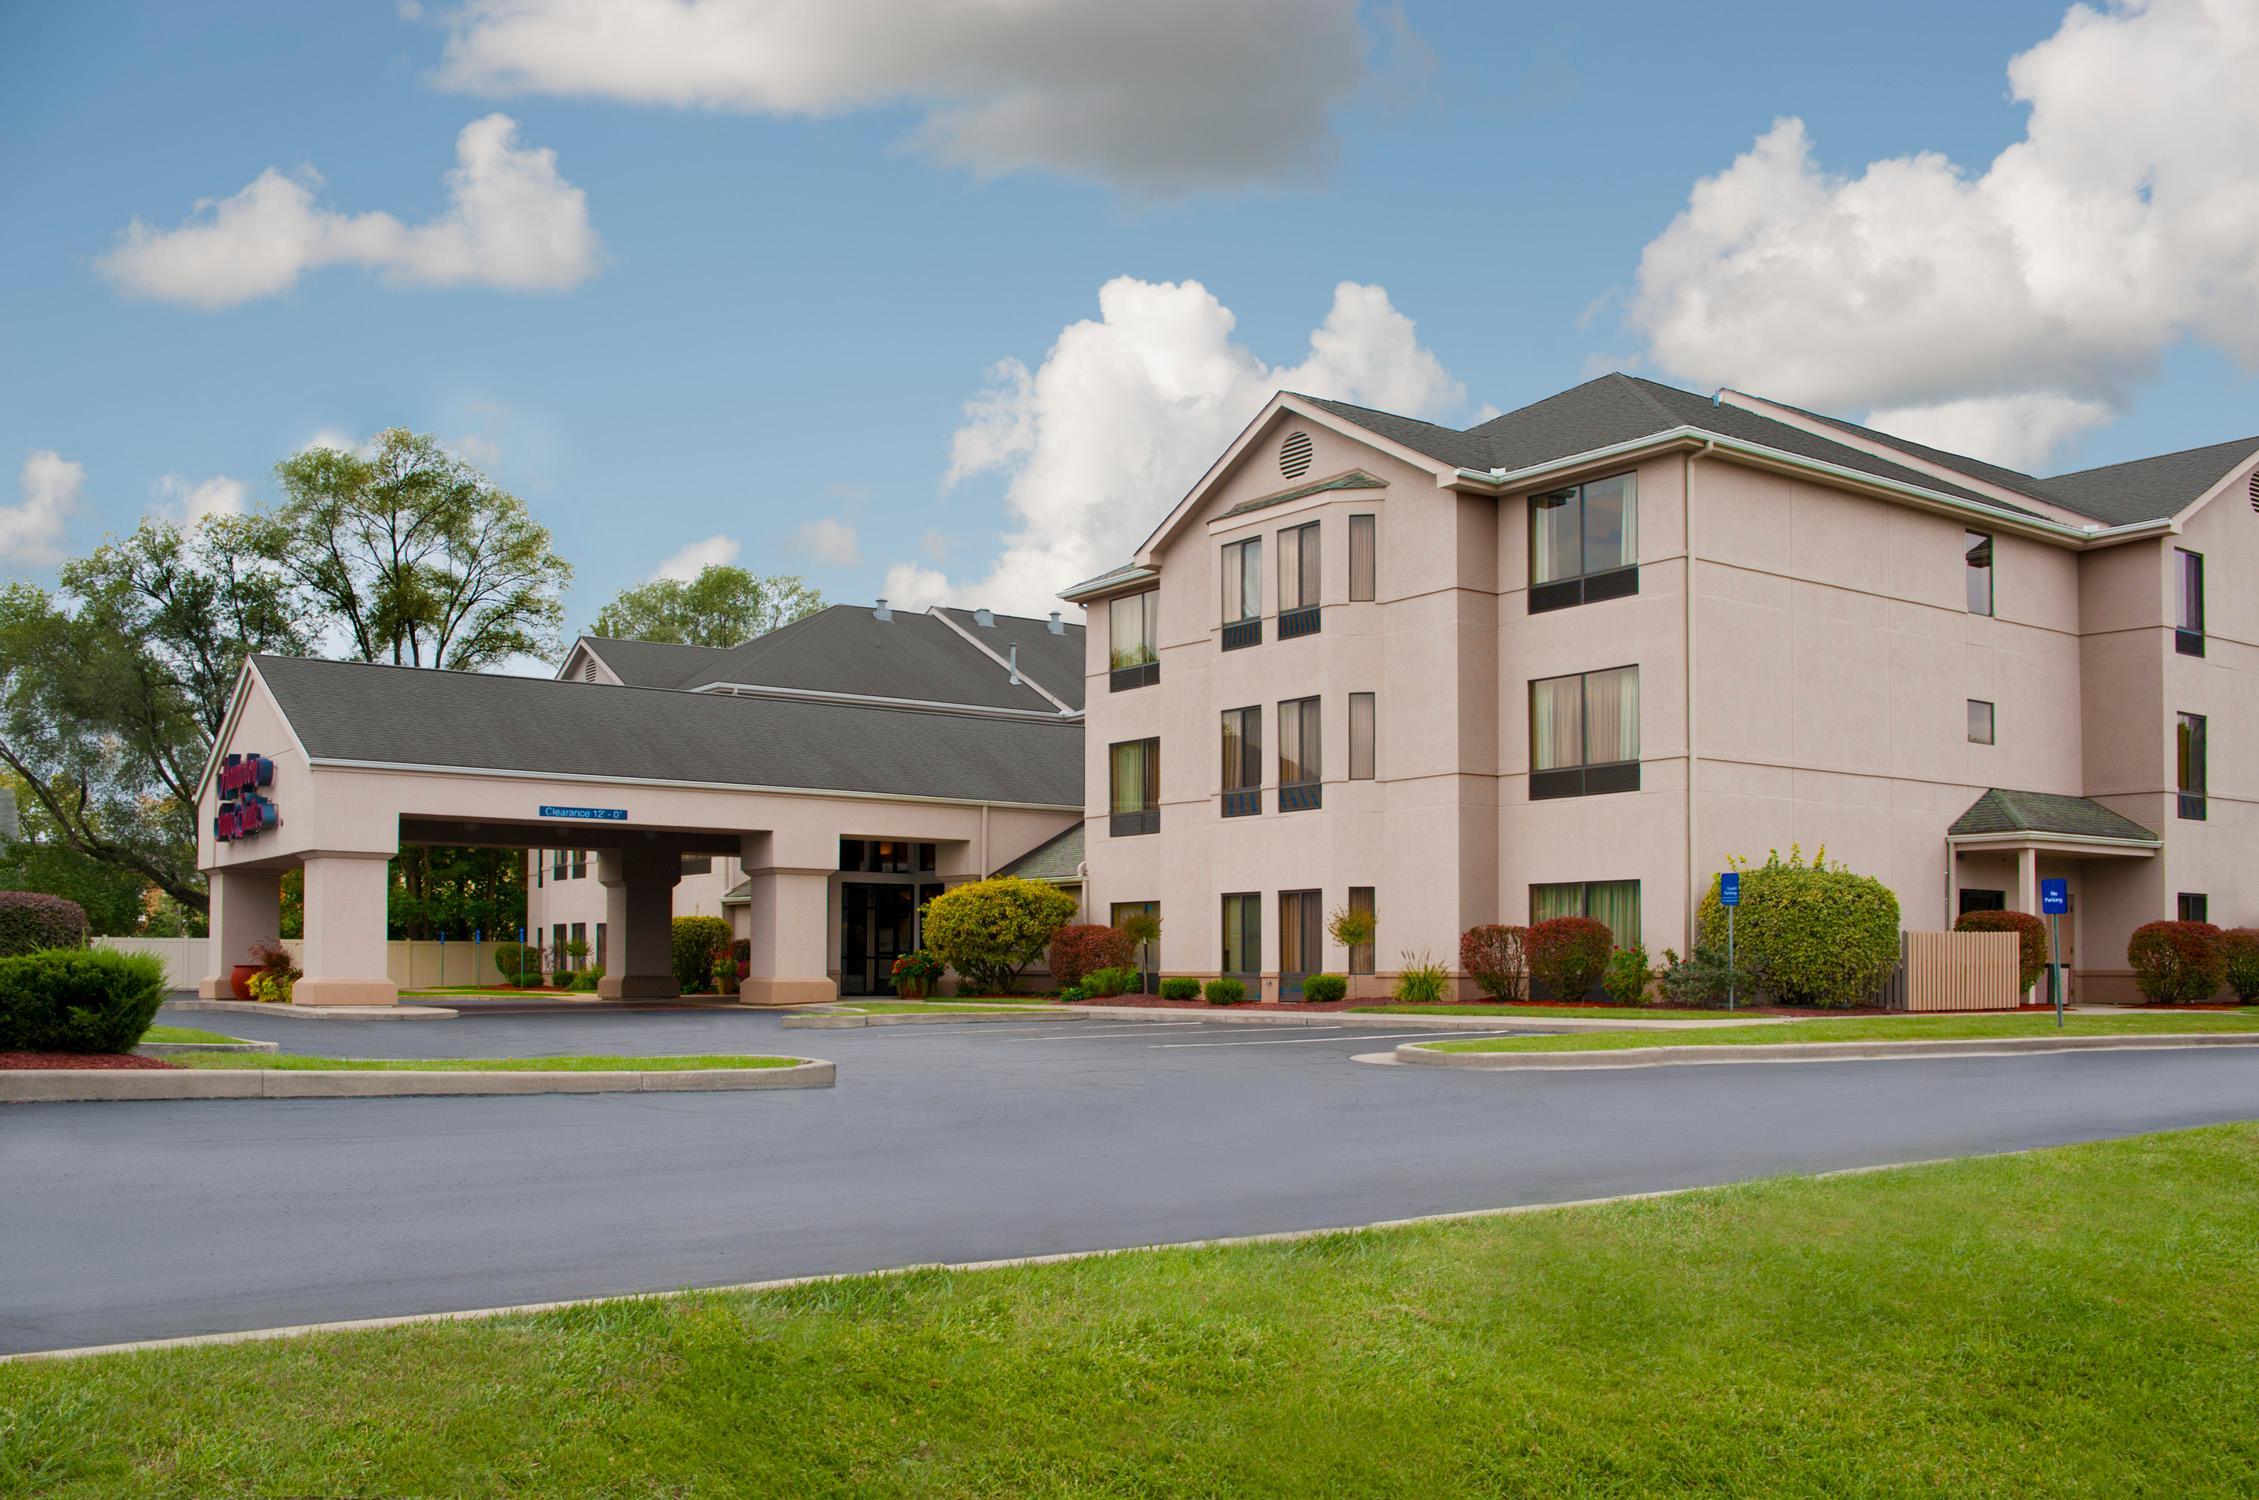 Photo of Hampton Inn & Suites South Bend, South Bend, IN